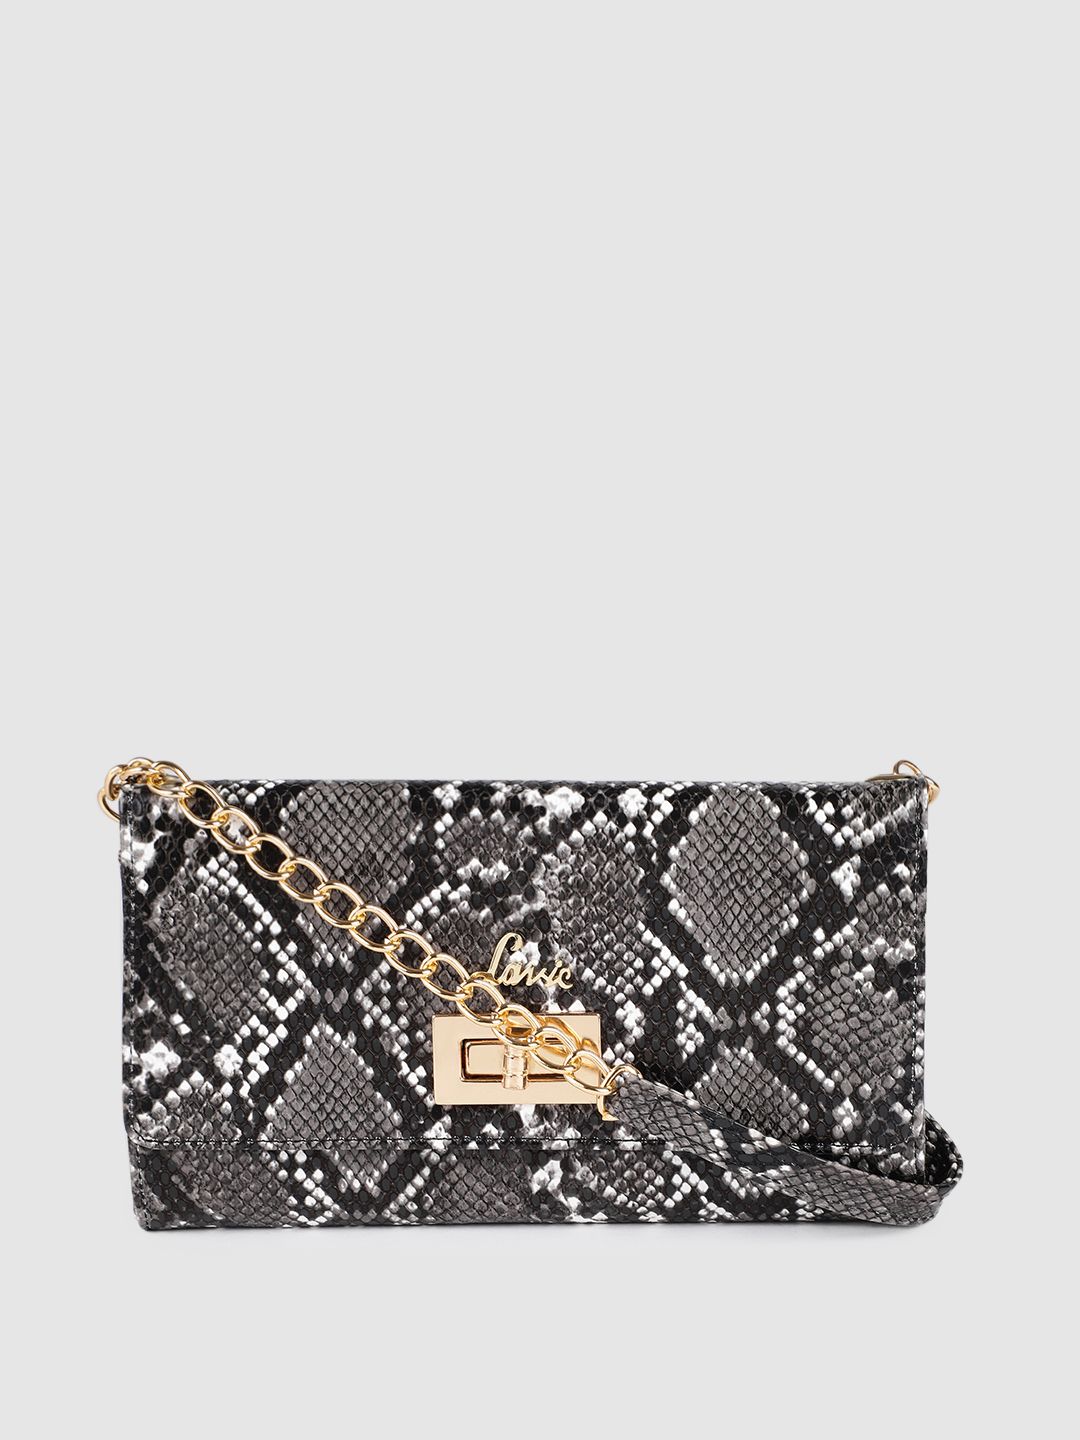 Lavie Black Textured Structured Sling Bag Price in India